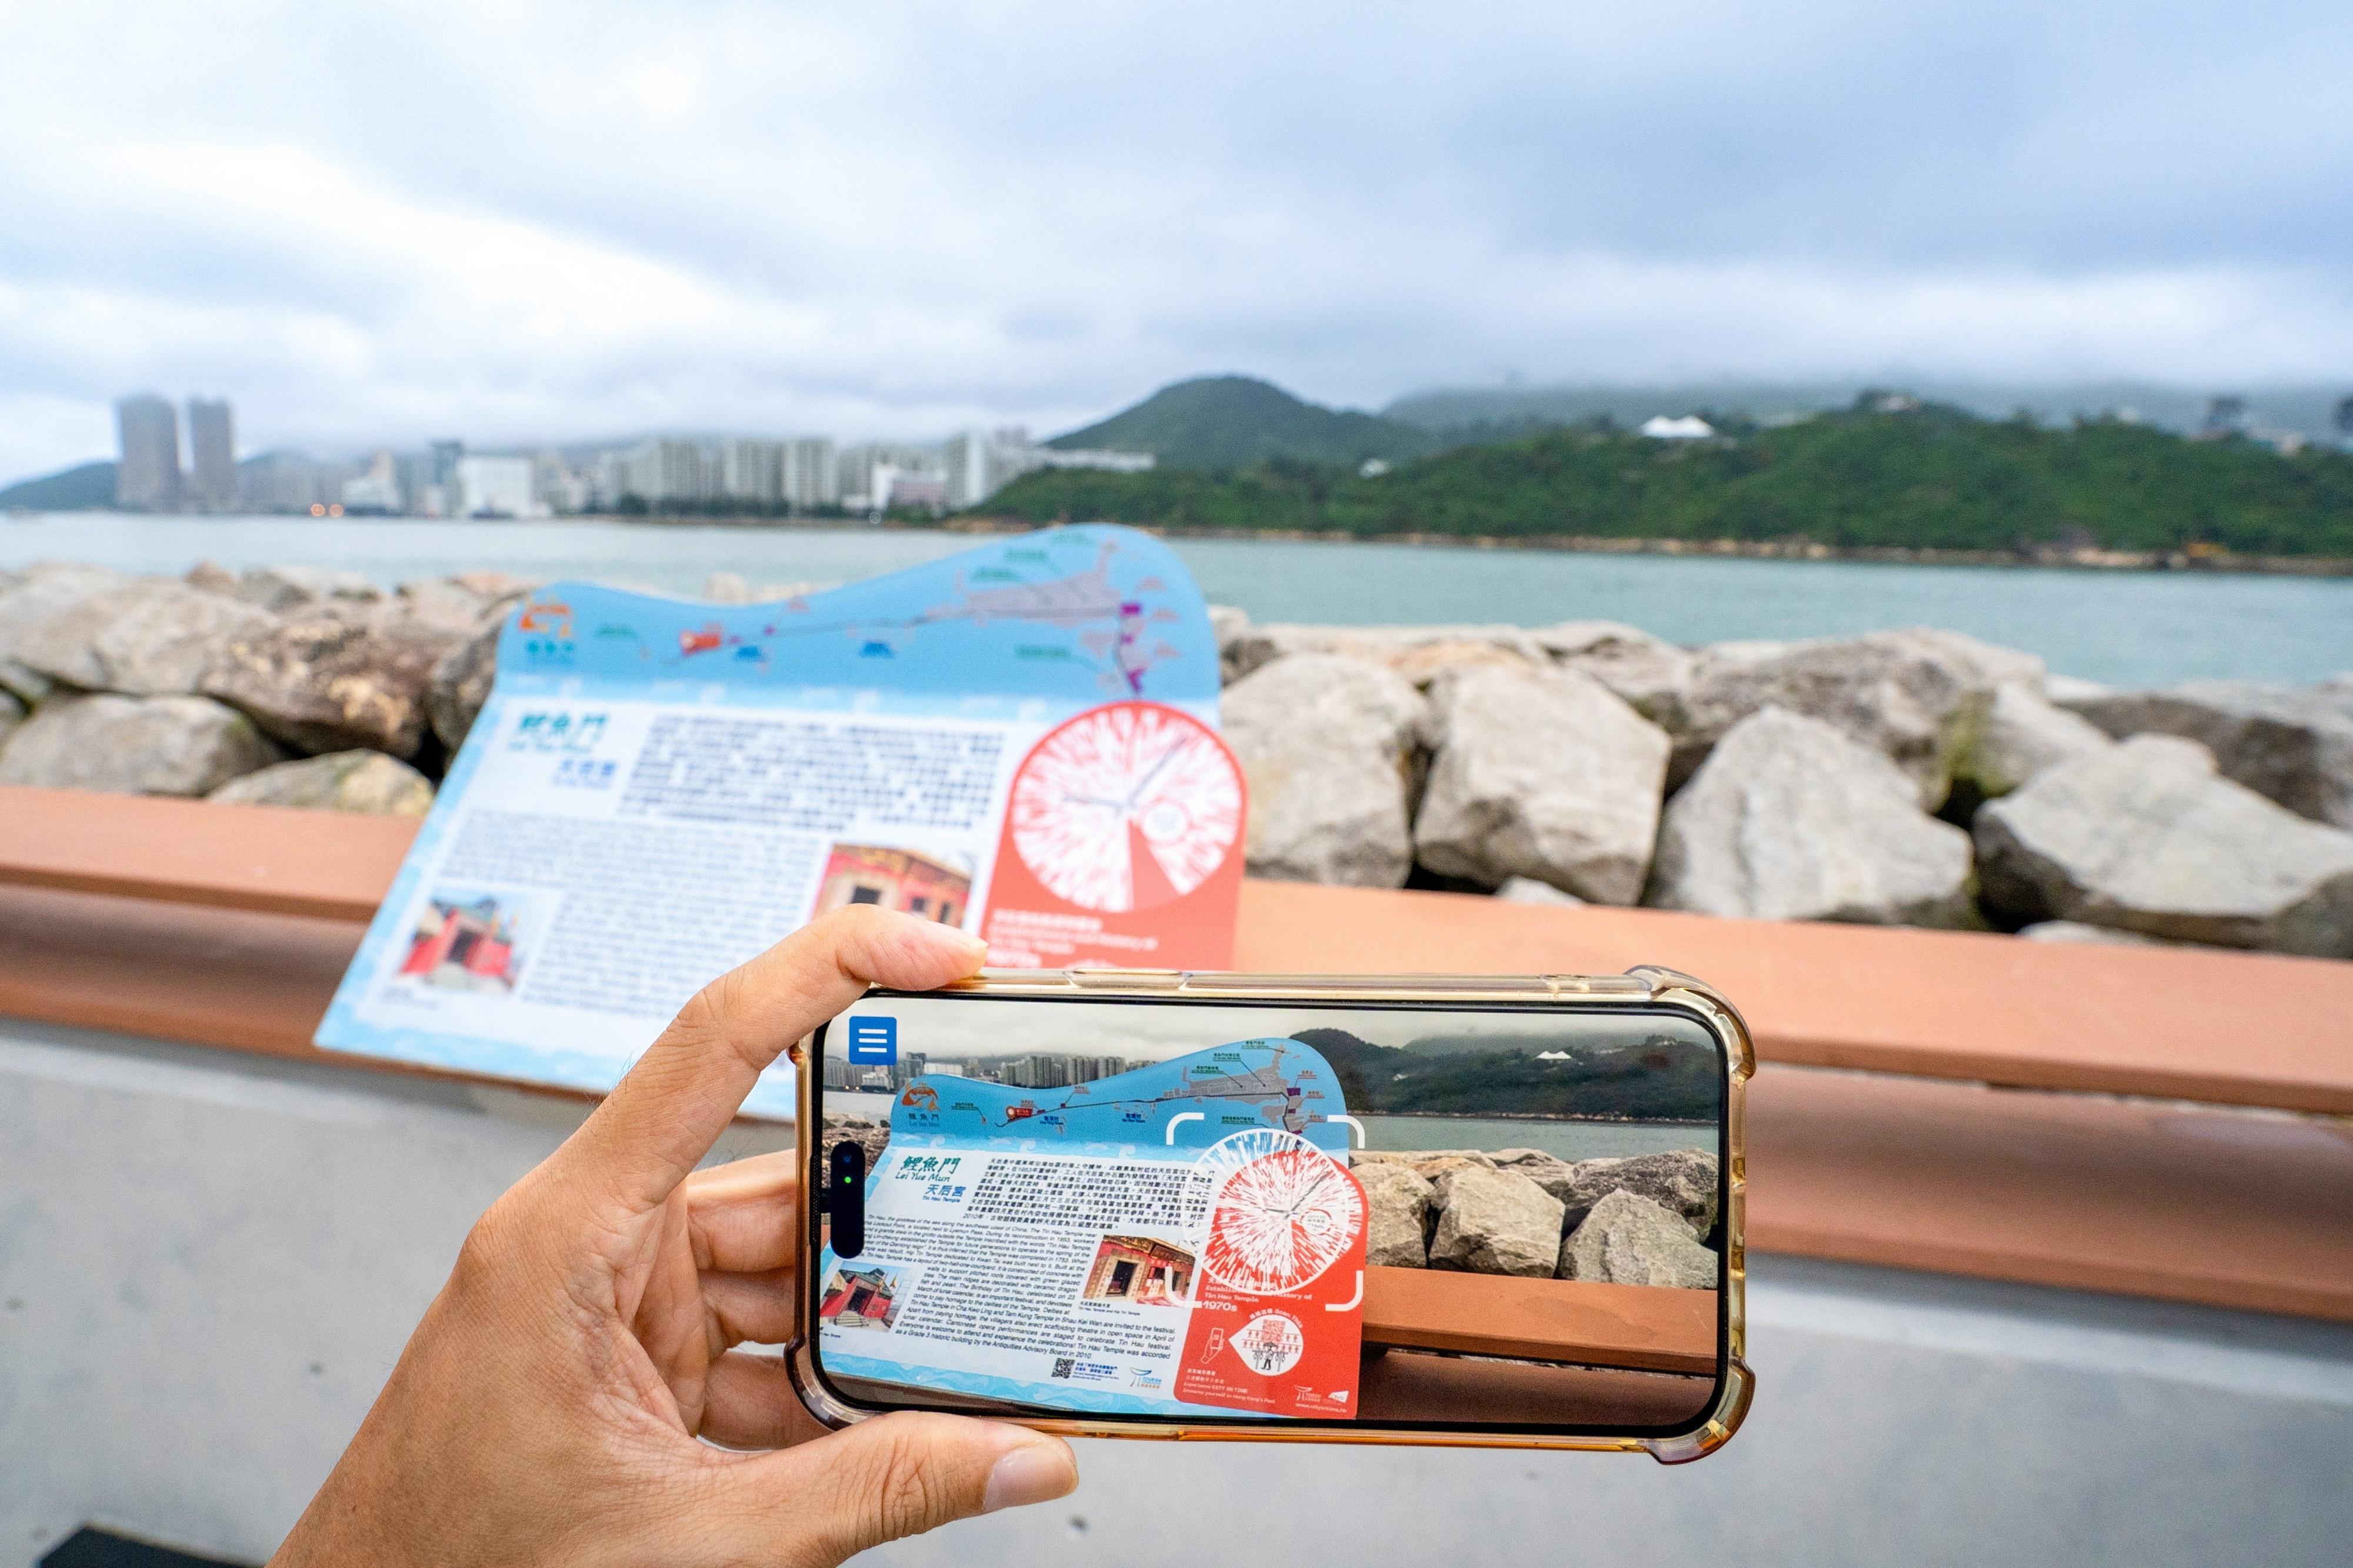 The Tourism Commission today (June 5) extended the City in Time tourism project to Lei Yue Mun and upgraded its mobile app features simultaneously to enrich the experience of both locals and tourists. Photo shows additional City in Time spots at the Lei Yue Mun promenade.